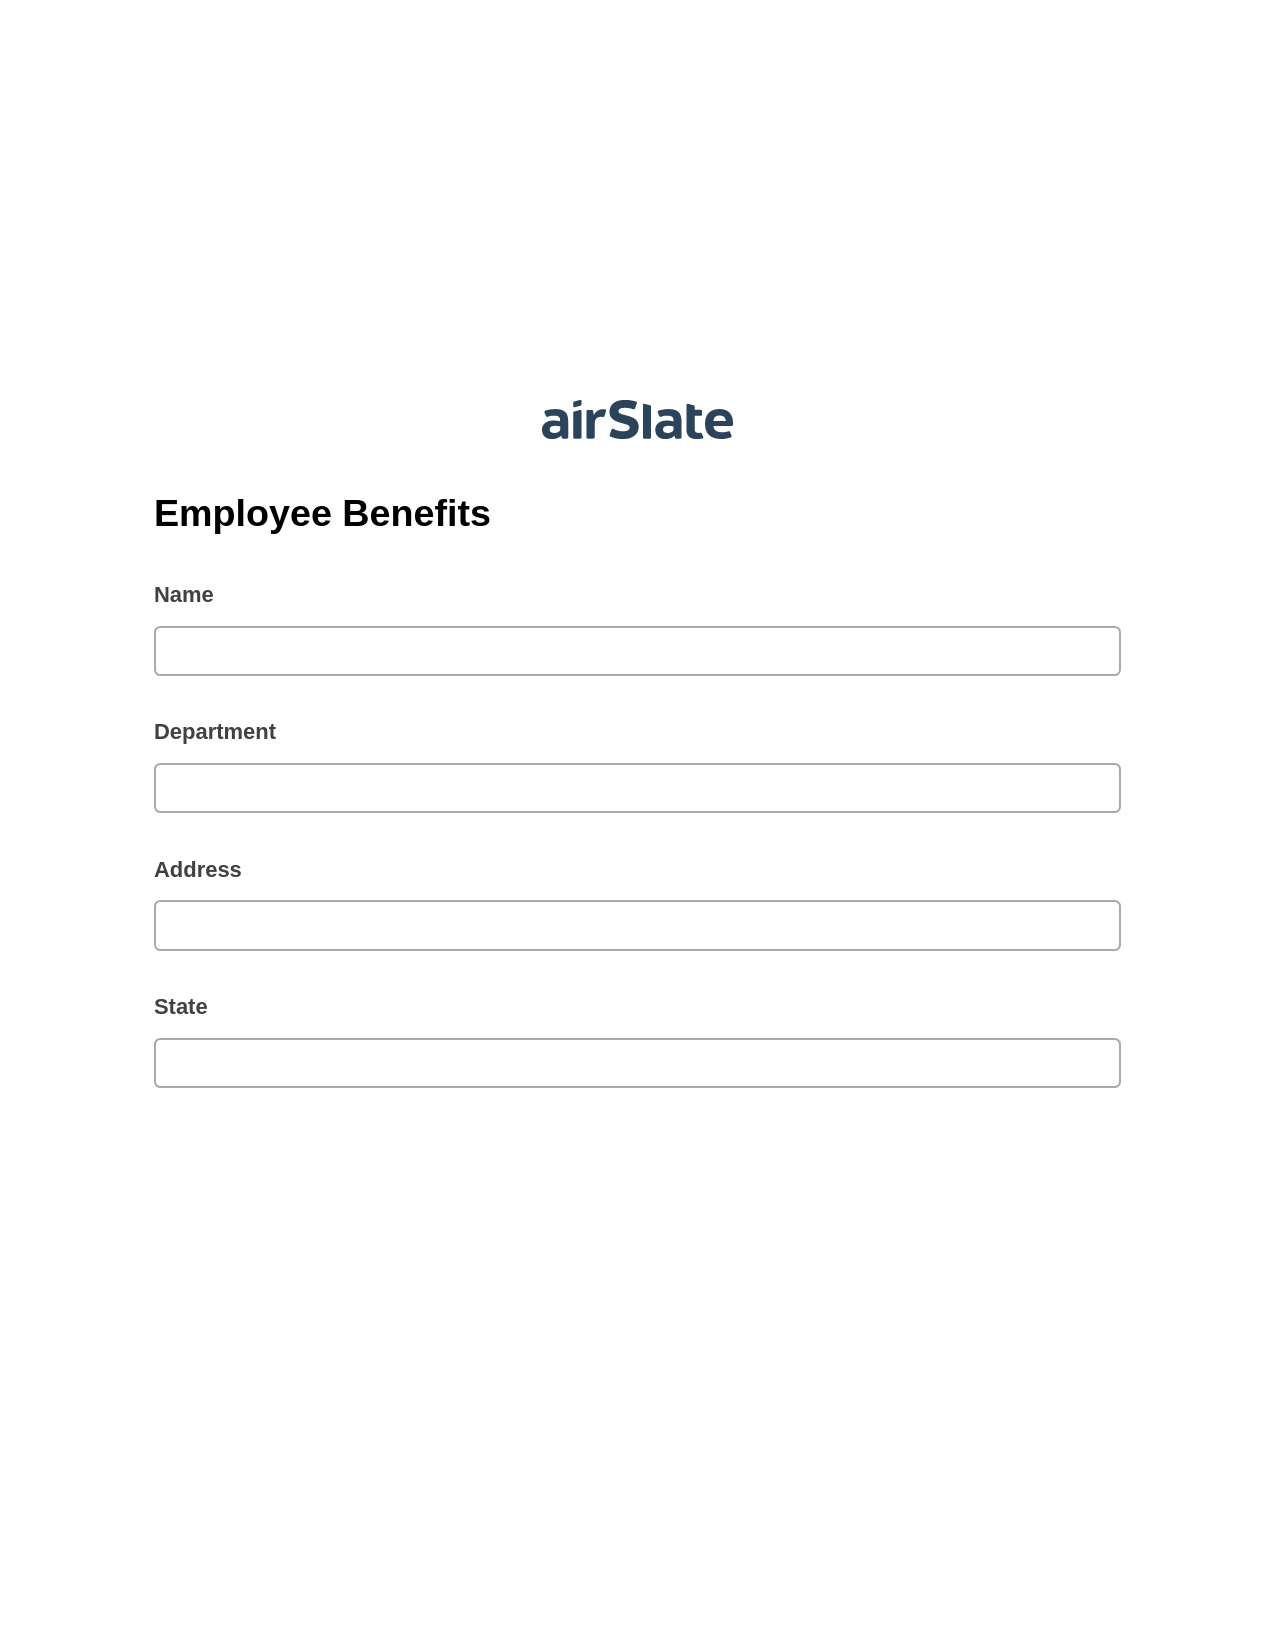 Multirole Employee Benefits Pre-fill Dropdowns from CSV File Bot, Export to MS Dynamics 365 Bot, Export to Formstack Documents Bot